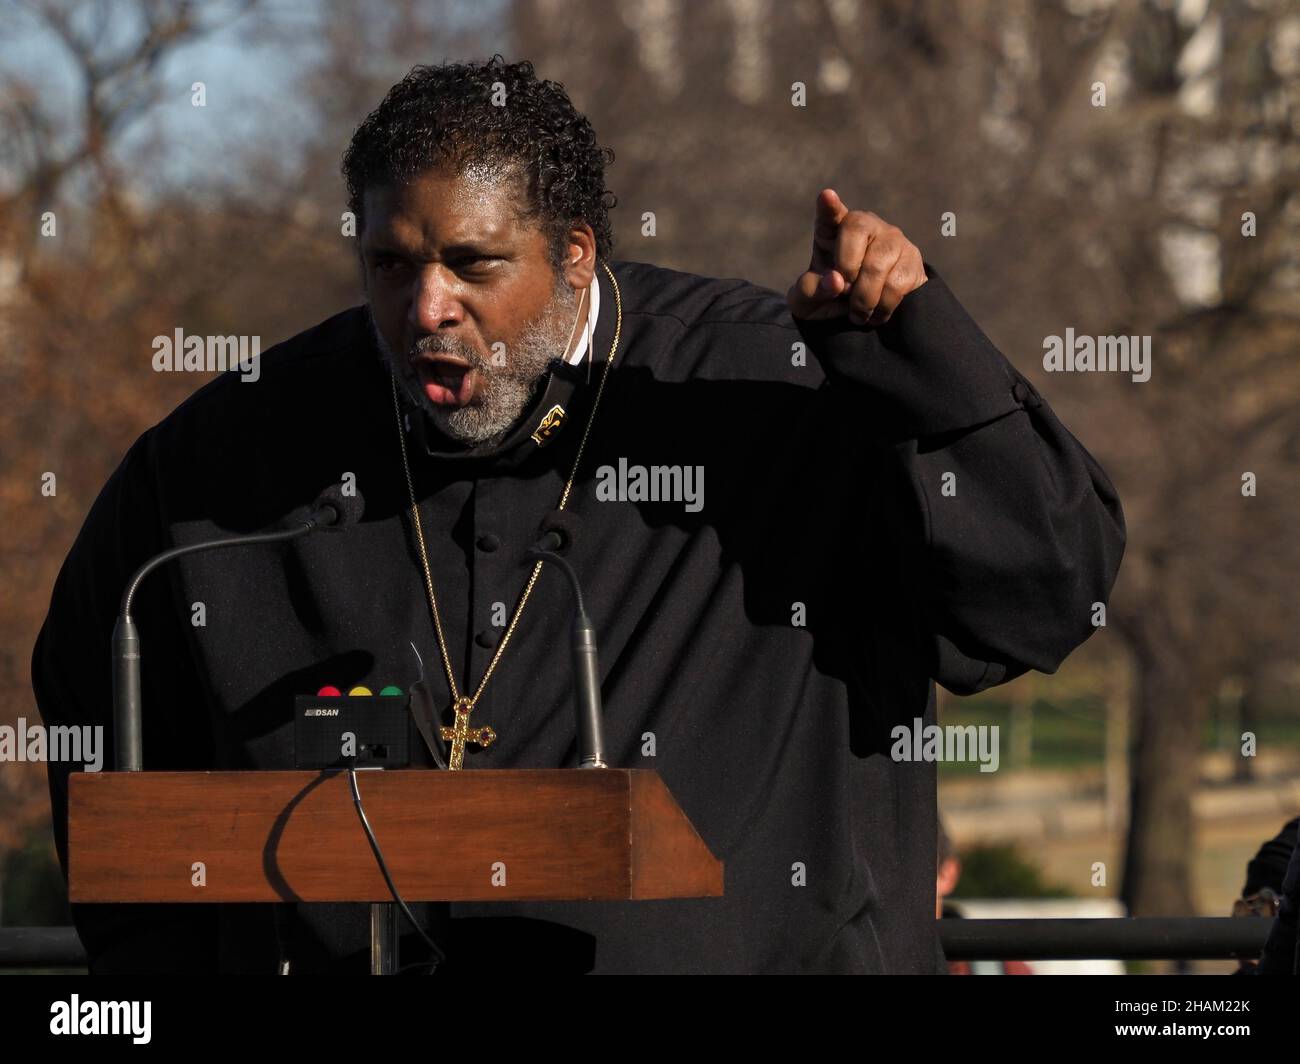 December 13, 2021, Washington, District of Columbia, USA: At the 'Get it Done in 2021' rally, the Reverend Dr. William J. Barber II, co-chair of the Poor PeopleÃs Campaign, called for the Senate to stop stonewalling and pass voting rights protections and the Build Back Better plan before the end of December. (Credit Image: © Sue Dorfman/ZUMA Press Wire) Stock Photo